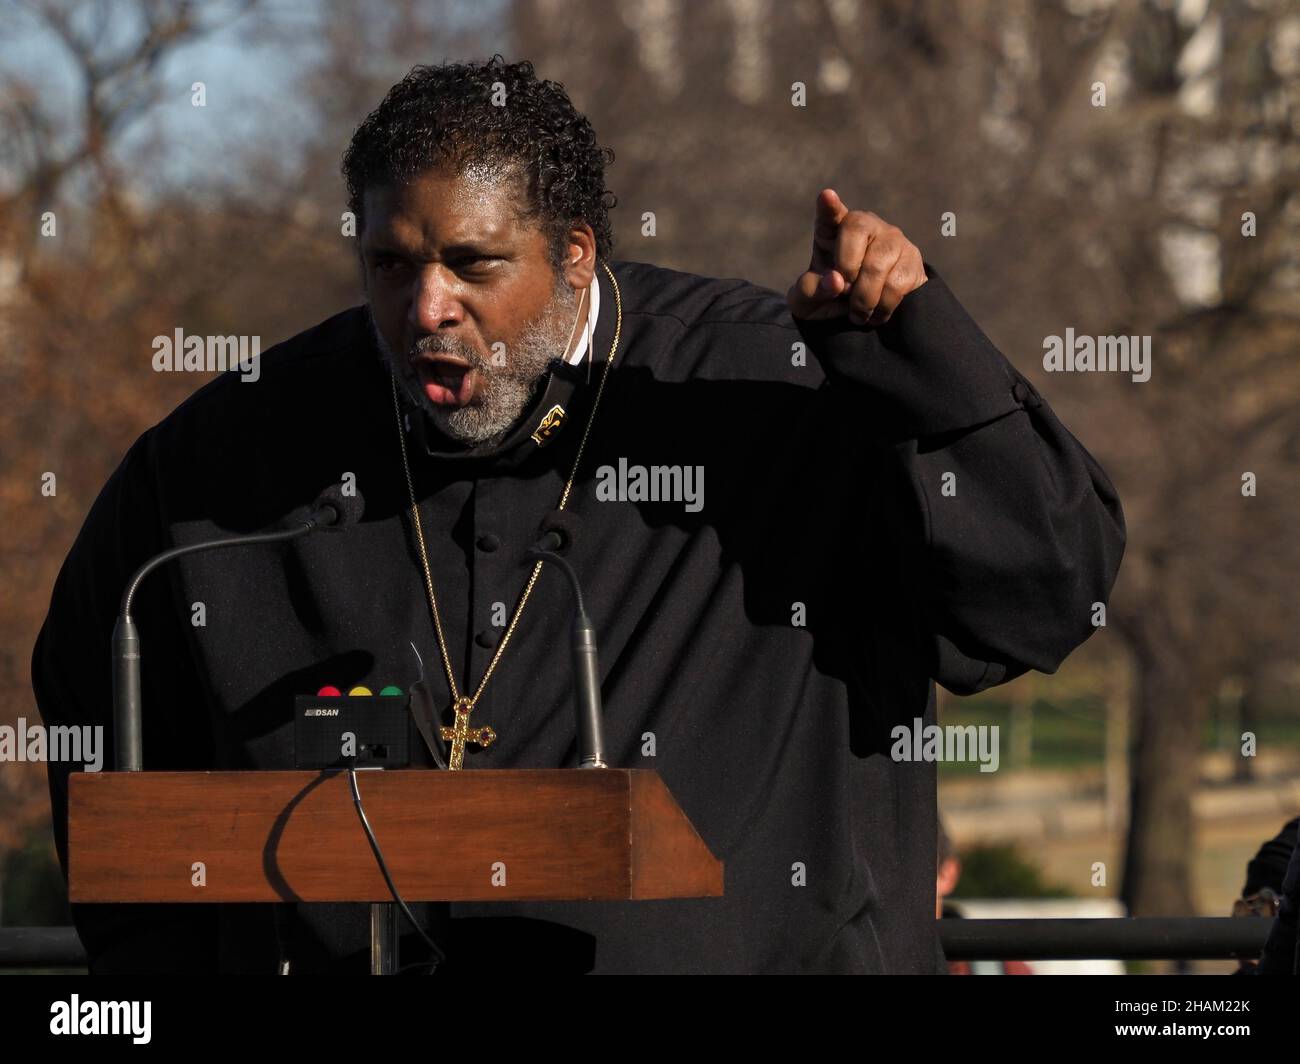 December 13, 2021, Washington, District of Columbia, USA: At the 'Get it Done in 2021' rally, the Reverend Dr. William J. Barber II, co-chair of the Poor PeopleÃs Campaign, called for the Senate to stop stonewalling and pass voting rights protections and the Build Back Better plan before the end of December. (Credit Image: © Sue Dorfman/ZUMA Press Wire) Stock Photo